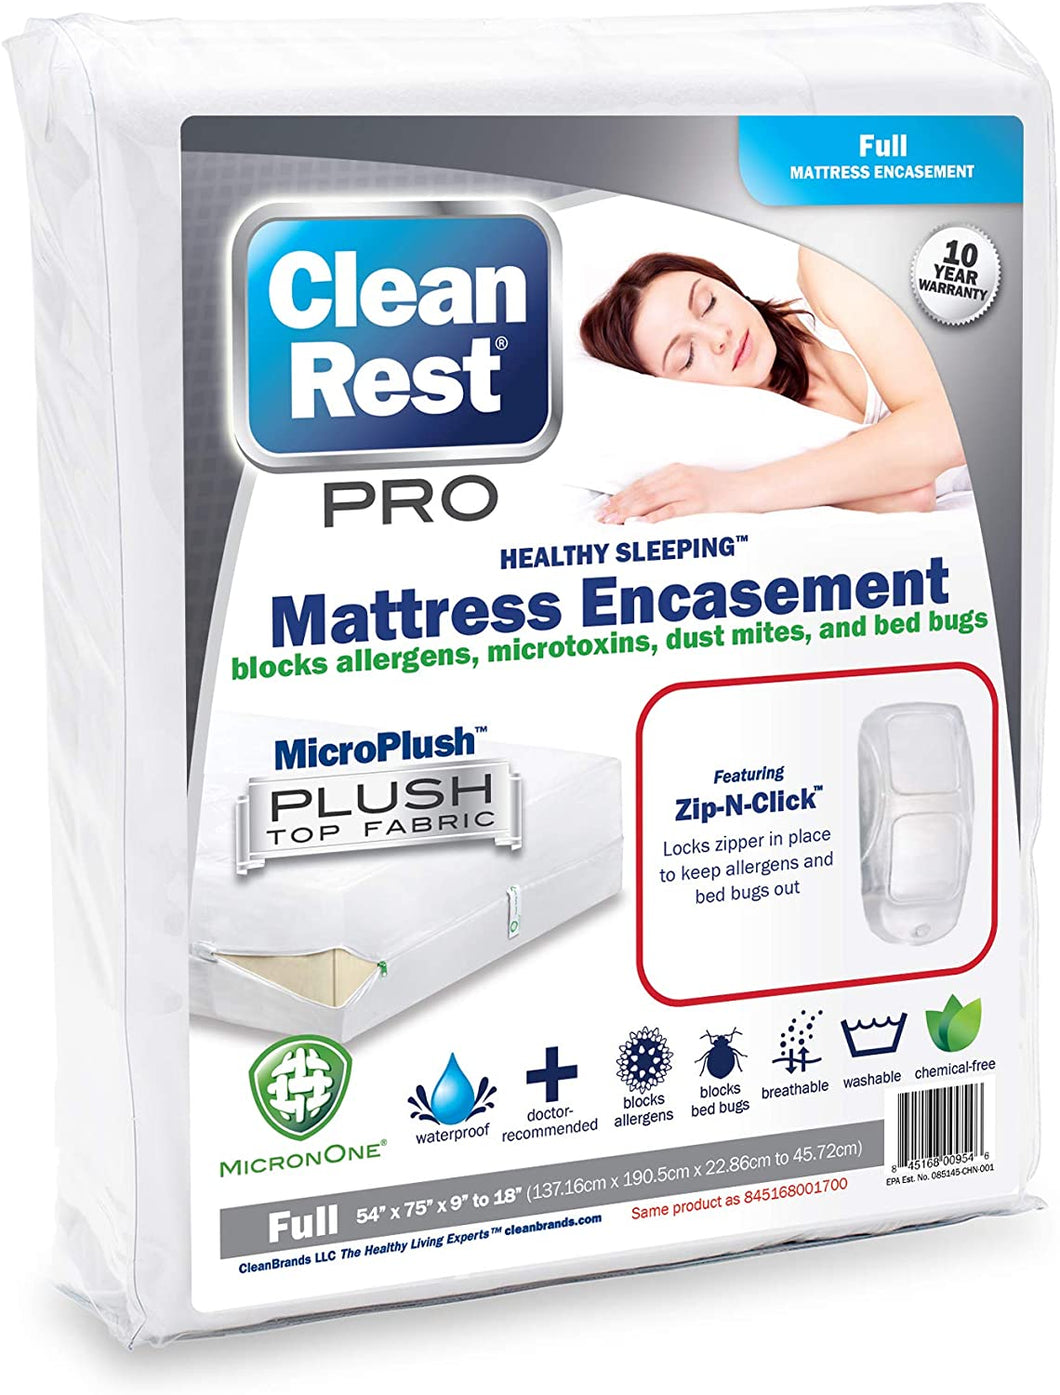 CHS Clean Rest Pro 100% bugproof waterproof Mattress Encasement (Full) provides a breathable barrier that blocks bed bugs and all micro-toxins larger than one micron like dust mites, mold spores, pet dander and pollen Patented zip-n-click closure prevents bed bug migration